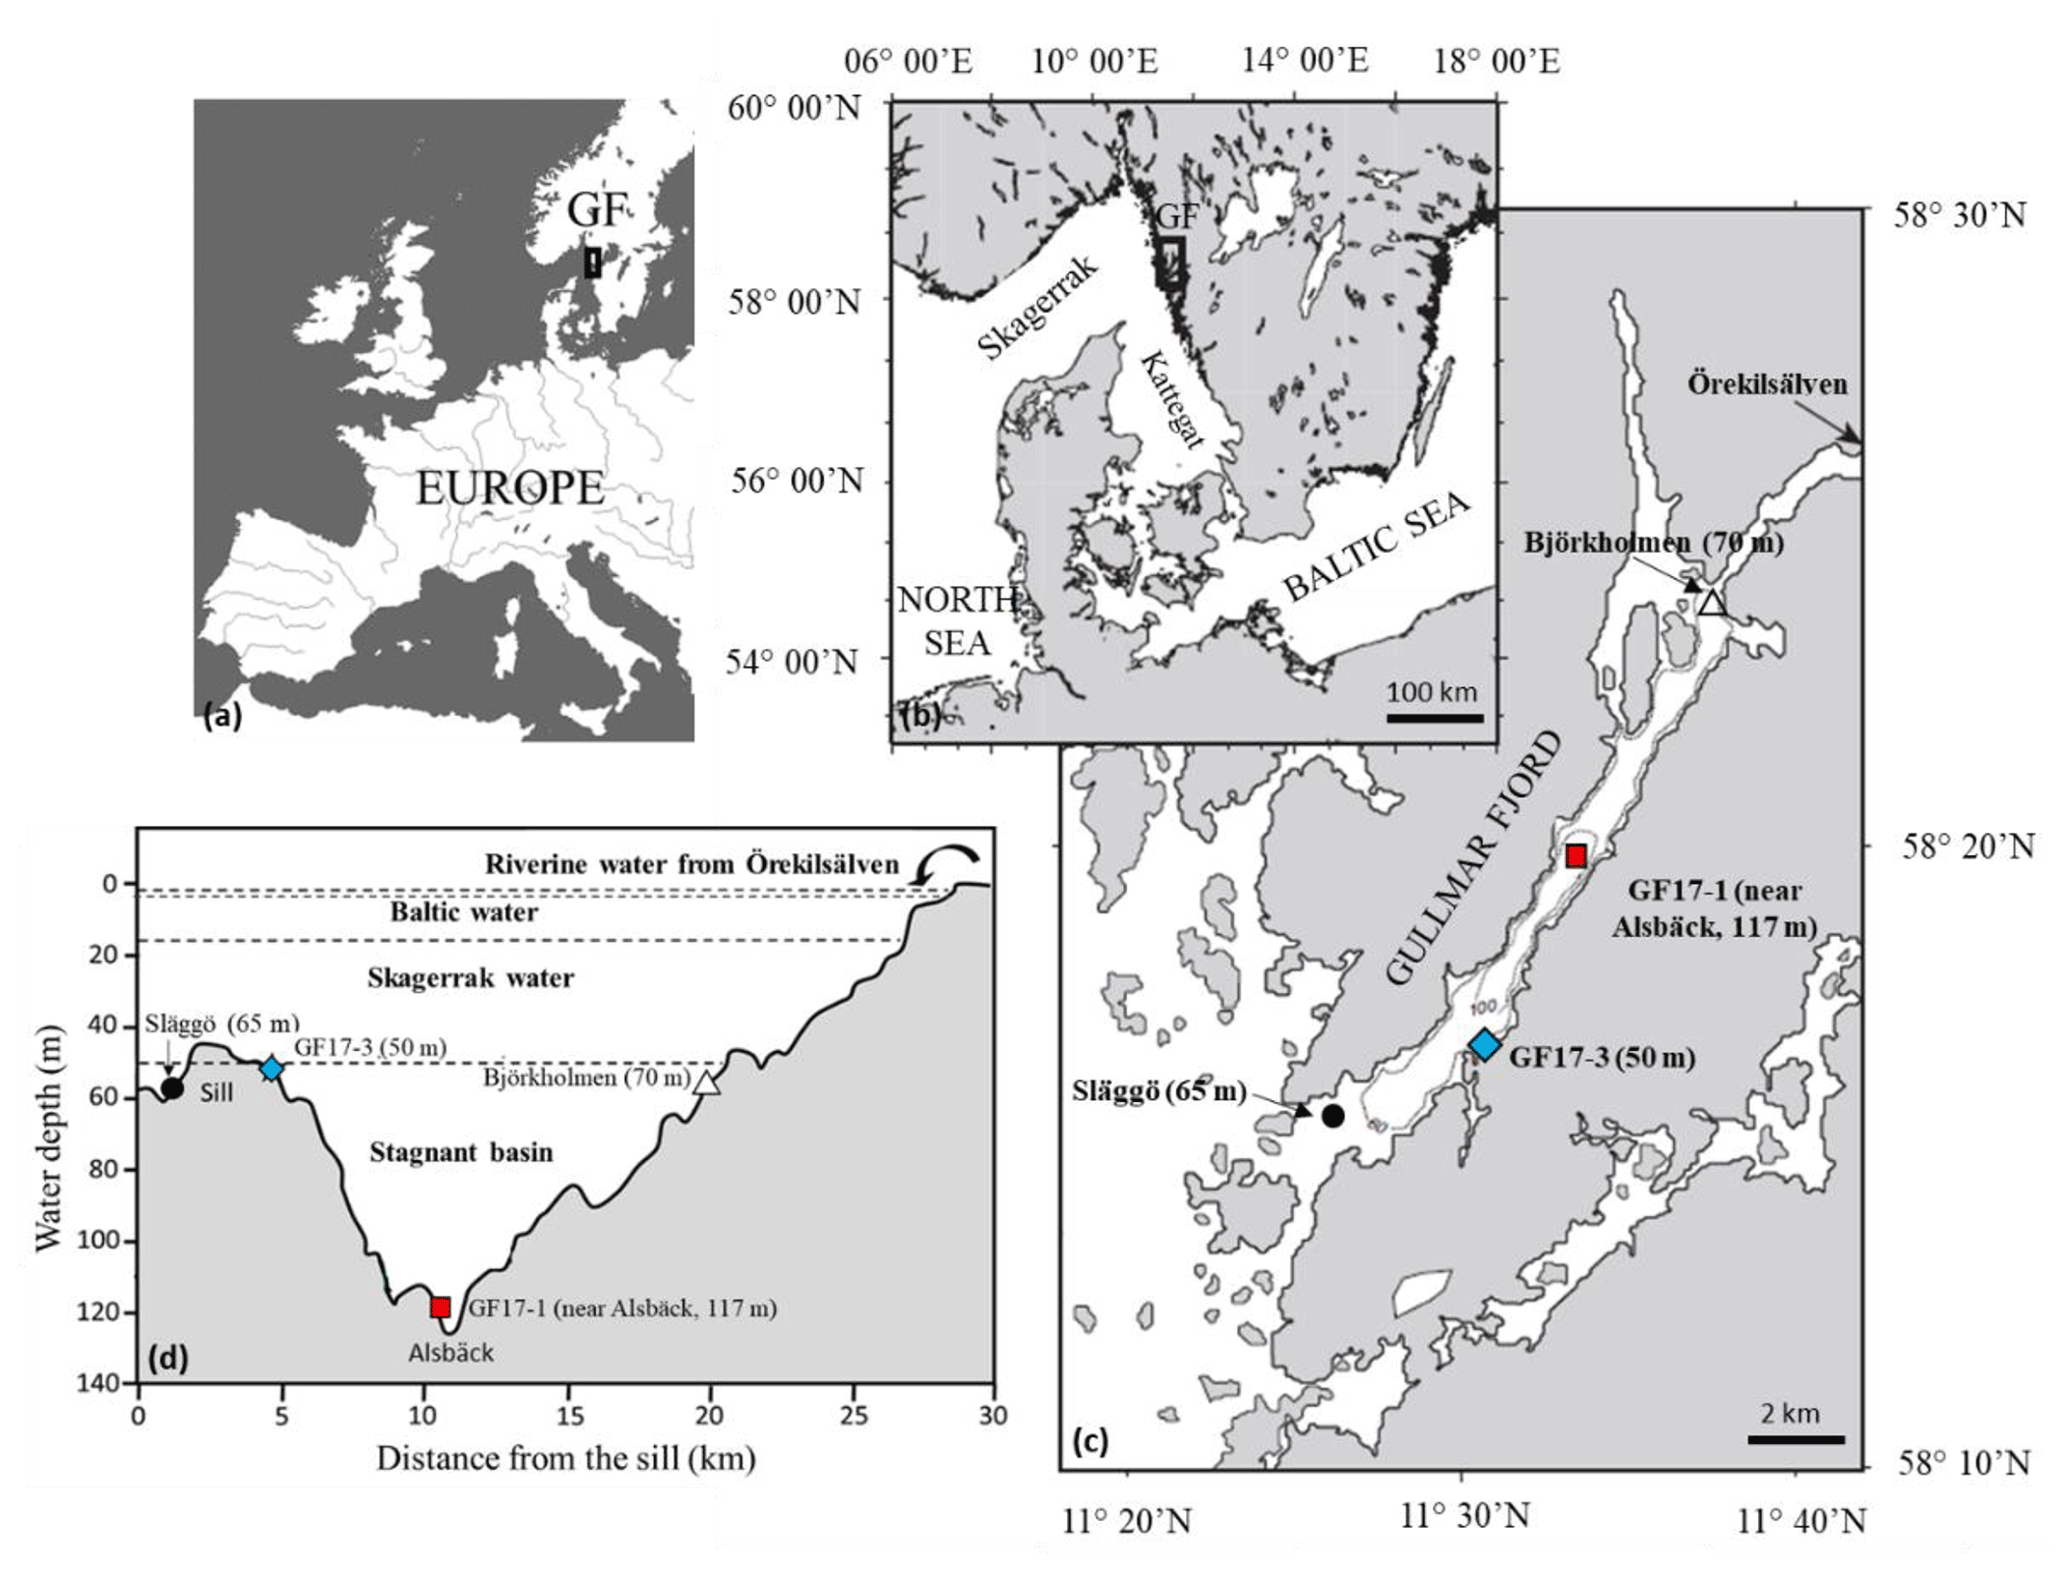 BG - Denitrification by benthic foraminifera their contribution to N-loss from a fjord environment